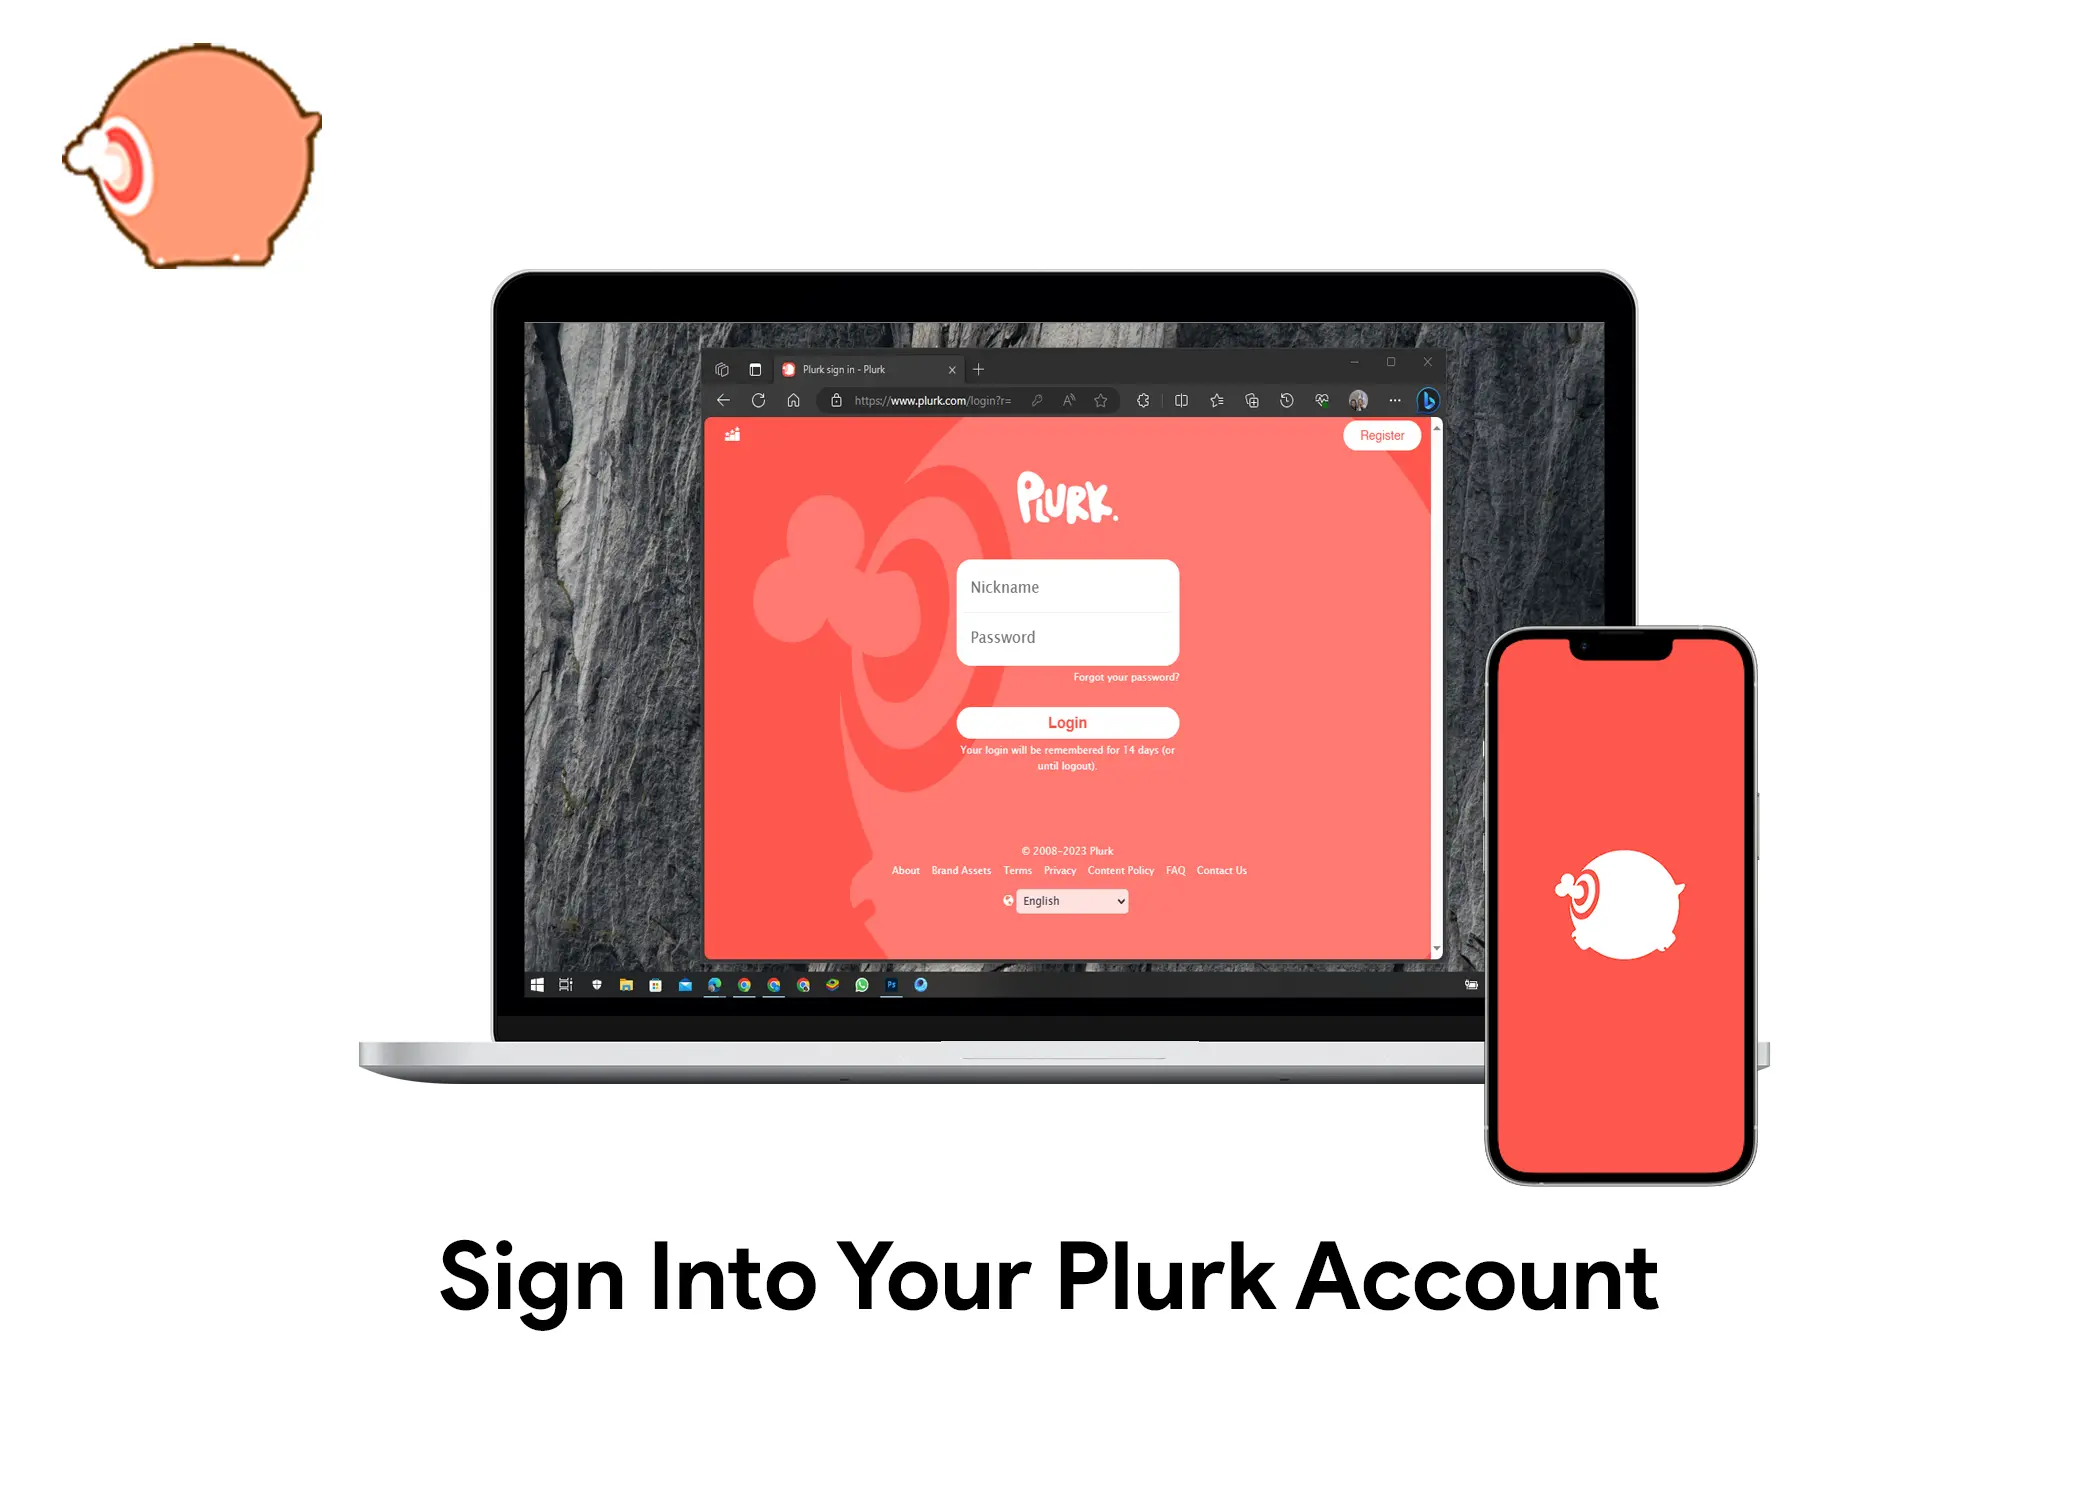 Plurk Log In - How to Sign Into Your Account